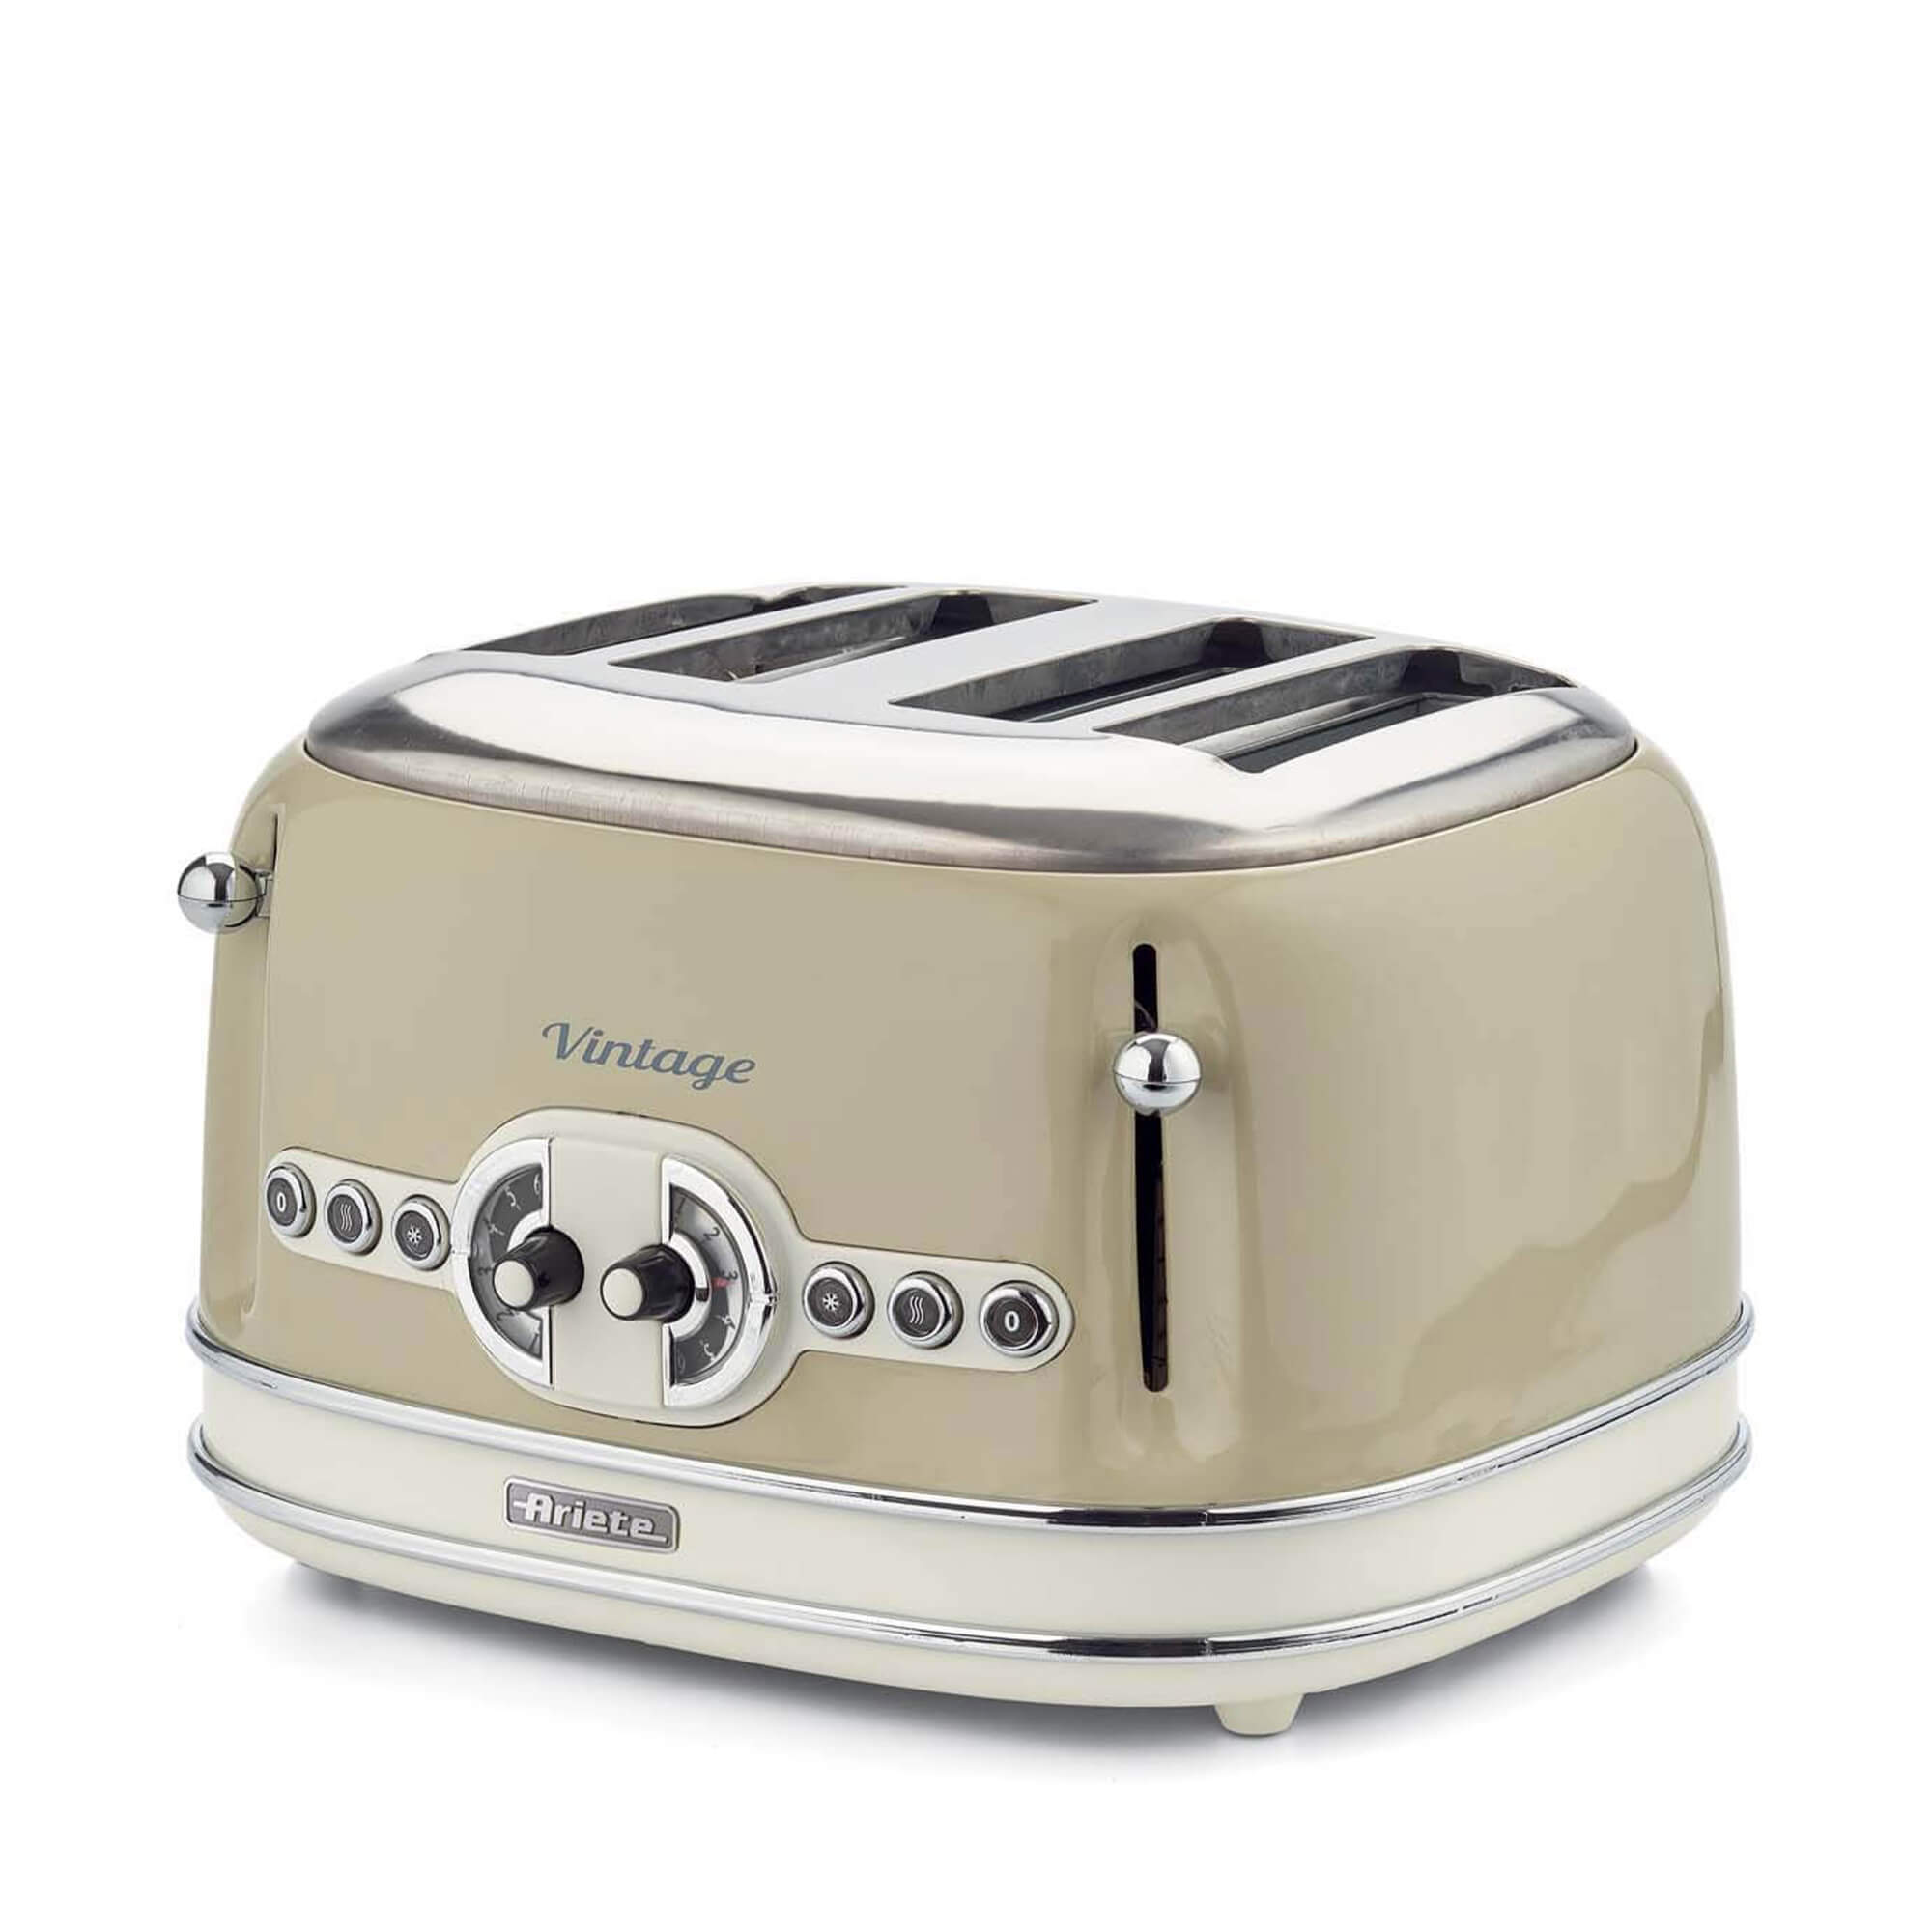 4-slice toaster Beige for toasting, heating and defrosting